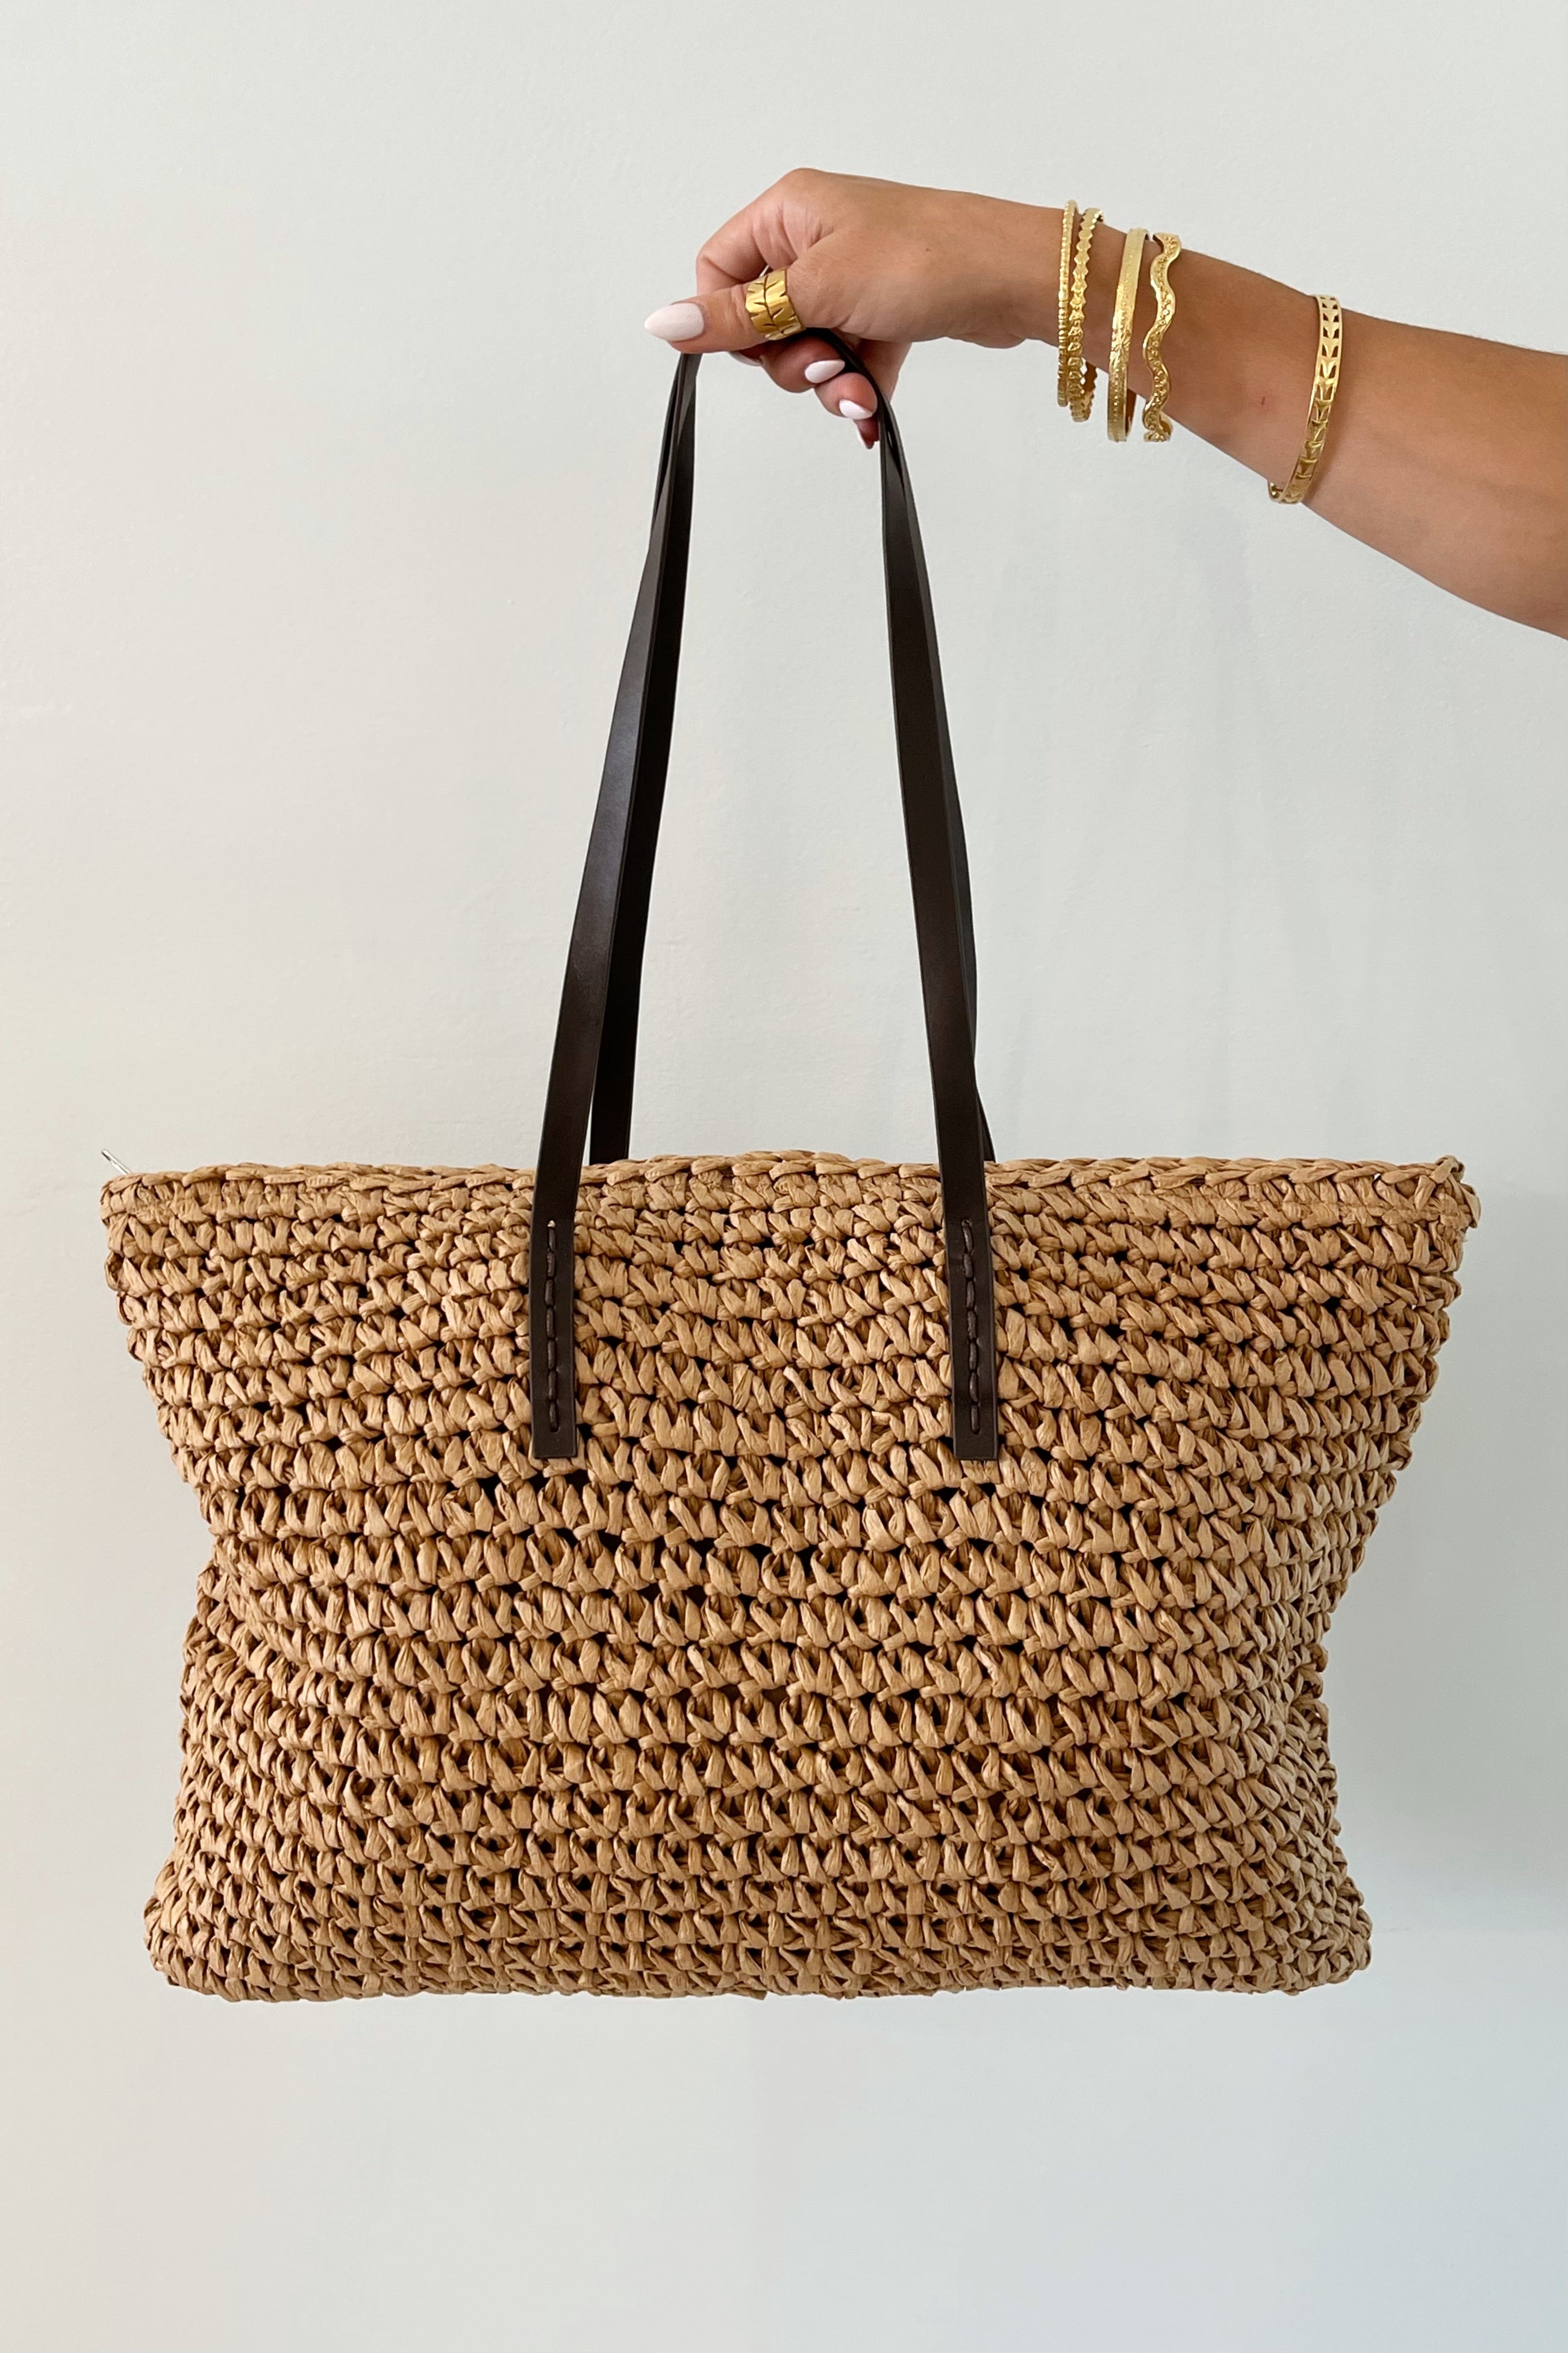 Large Woven Beach Tote / Driftwood